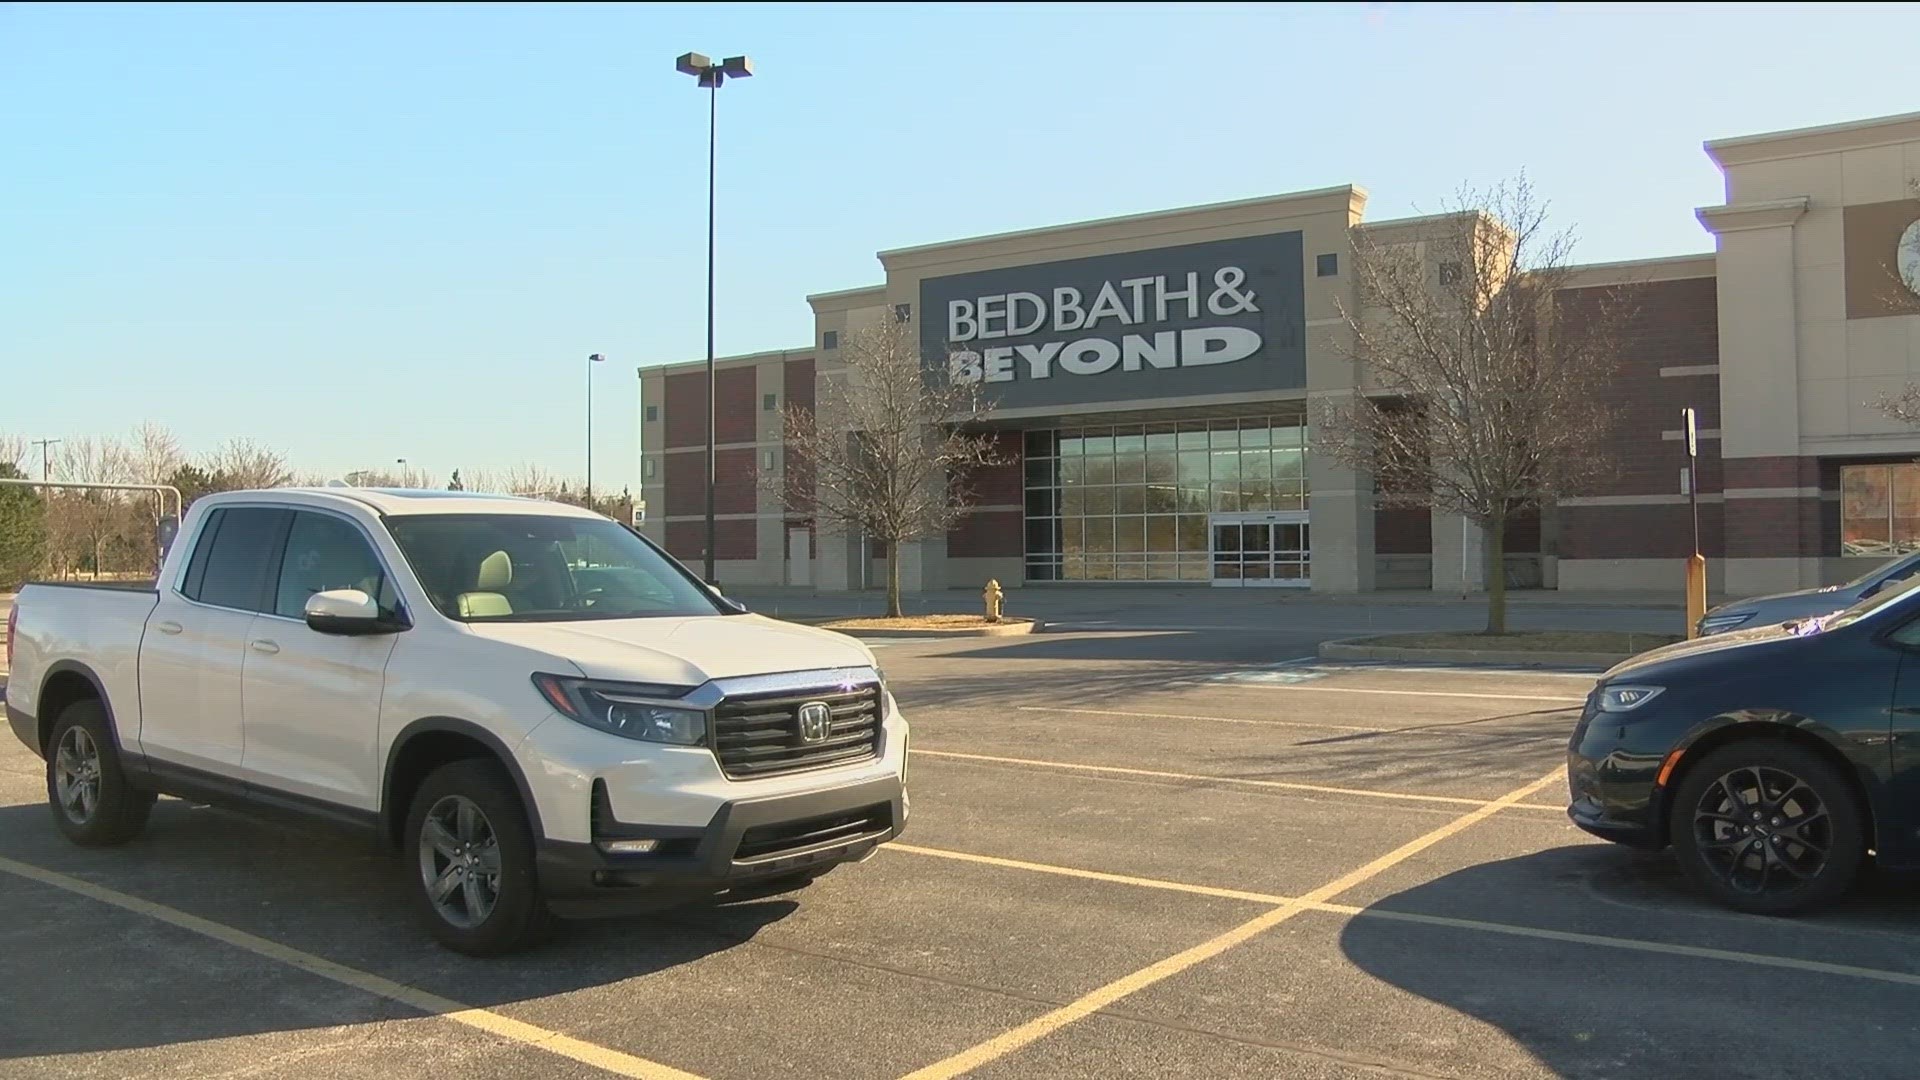 The store will be located at 10027 Fremont Pike, the former location of the now-closed Bed Bath & Beyond.